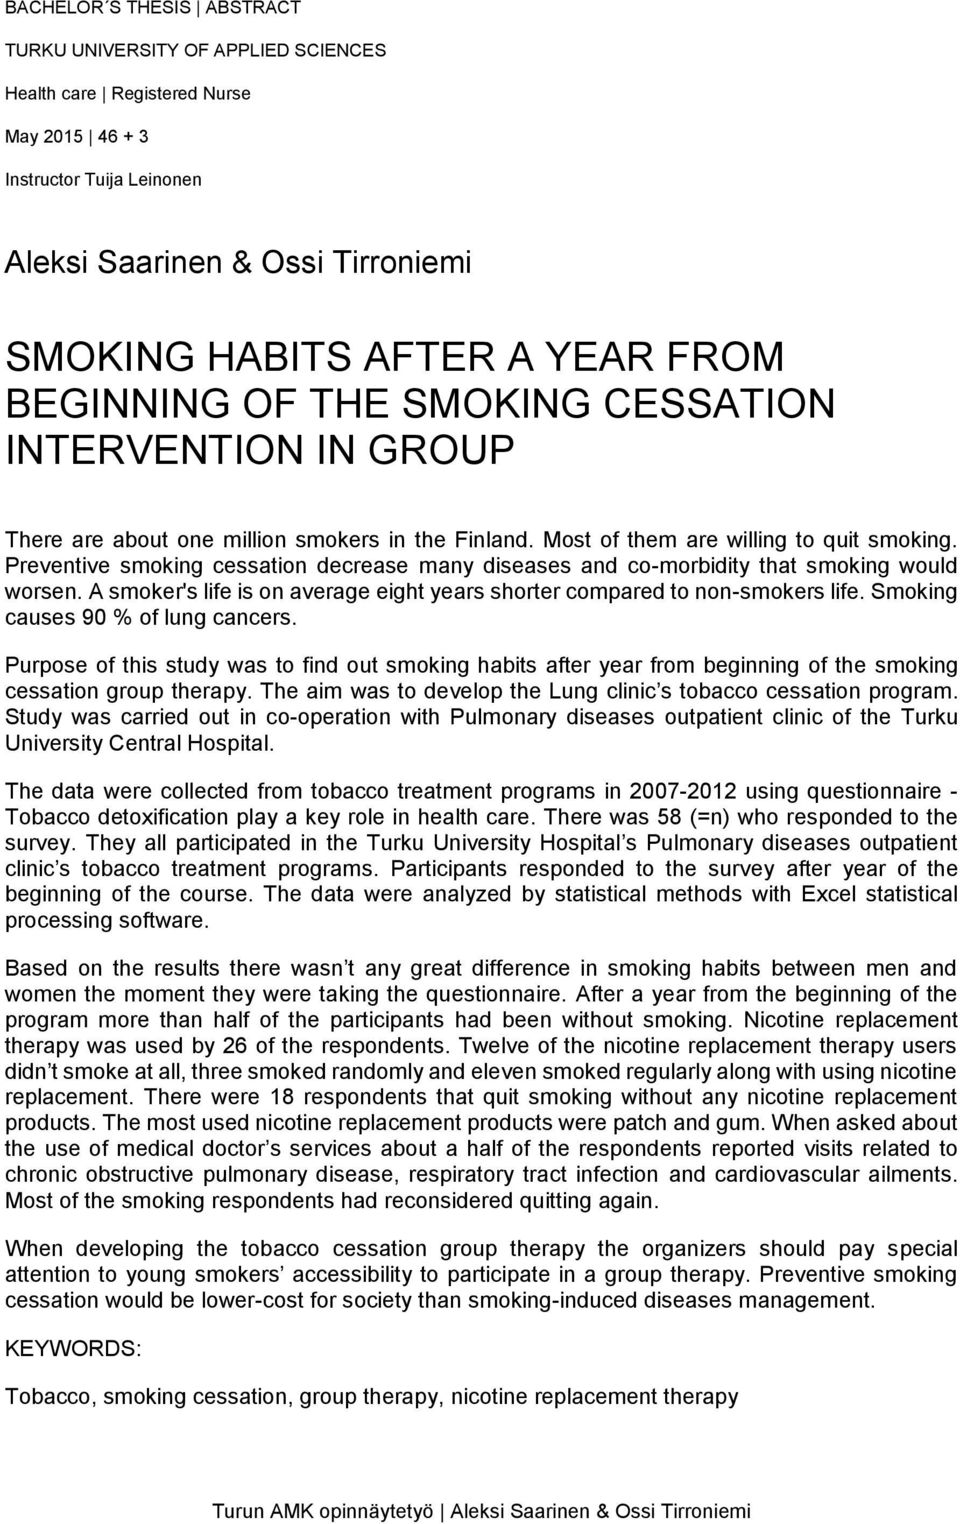 Preventive smoking cessation decrease many diseases and co-morbidity that smoking would worsen. A smoker's life is on average eight years shorter compared to non-smokers life.